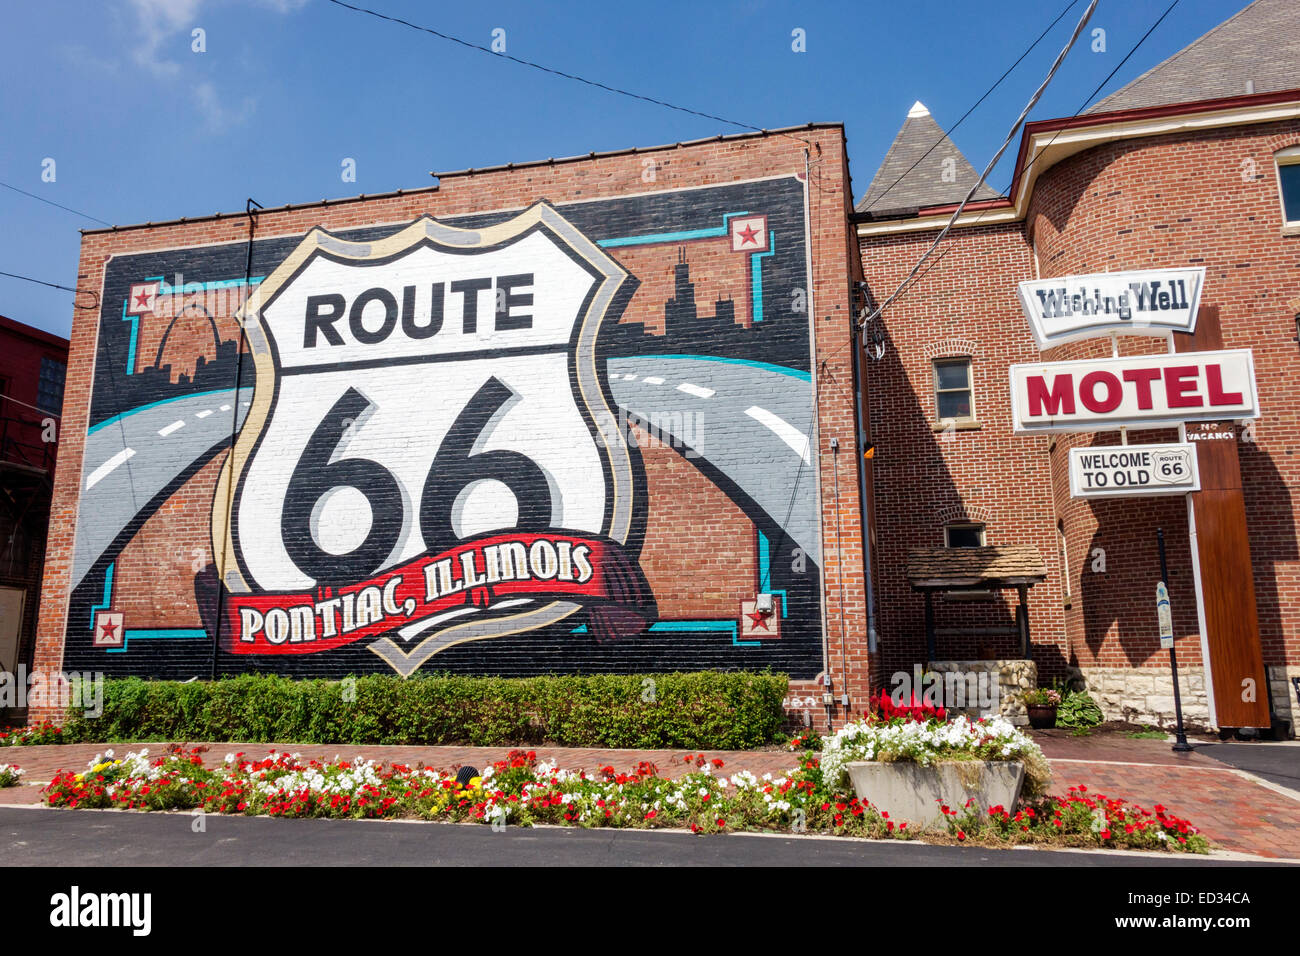 Illinois Pontiac,historic highway Route 66,mural,Wishing Well Motel,IL140905046 Stock Photo